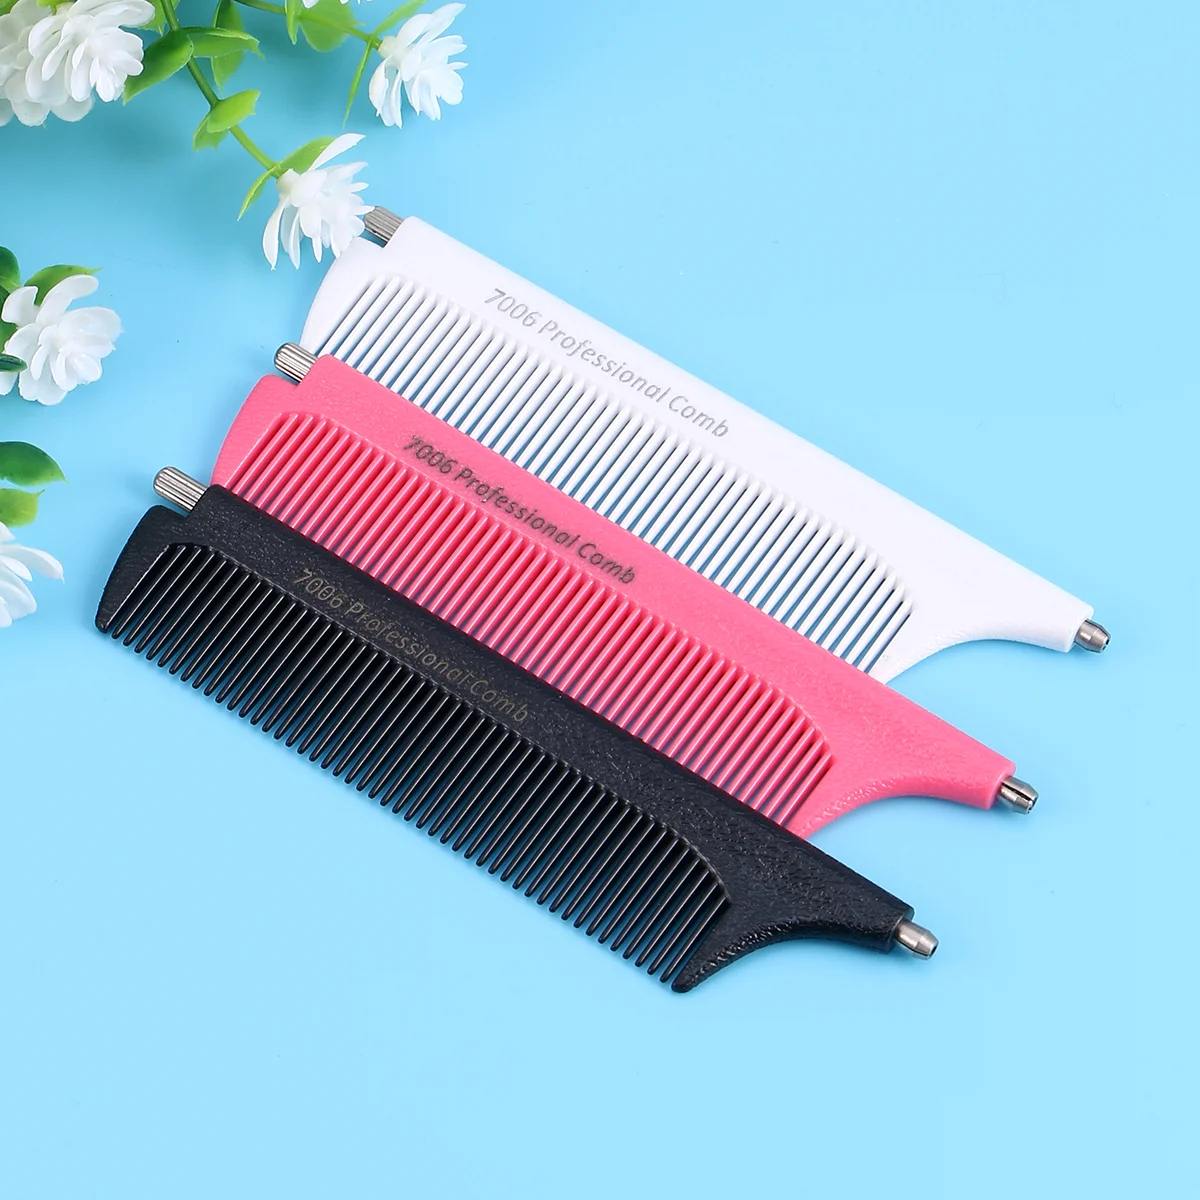 

Comb Hair Rat Tail Combs Teasingparting Metalstyling Braiding Fine Women Steel Accessories Stylist Brush Static Anti Pintail